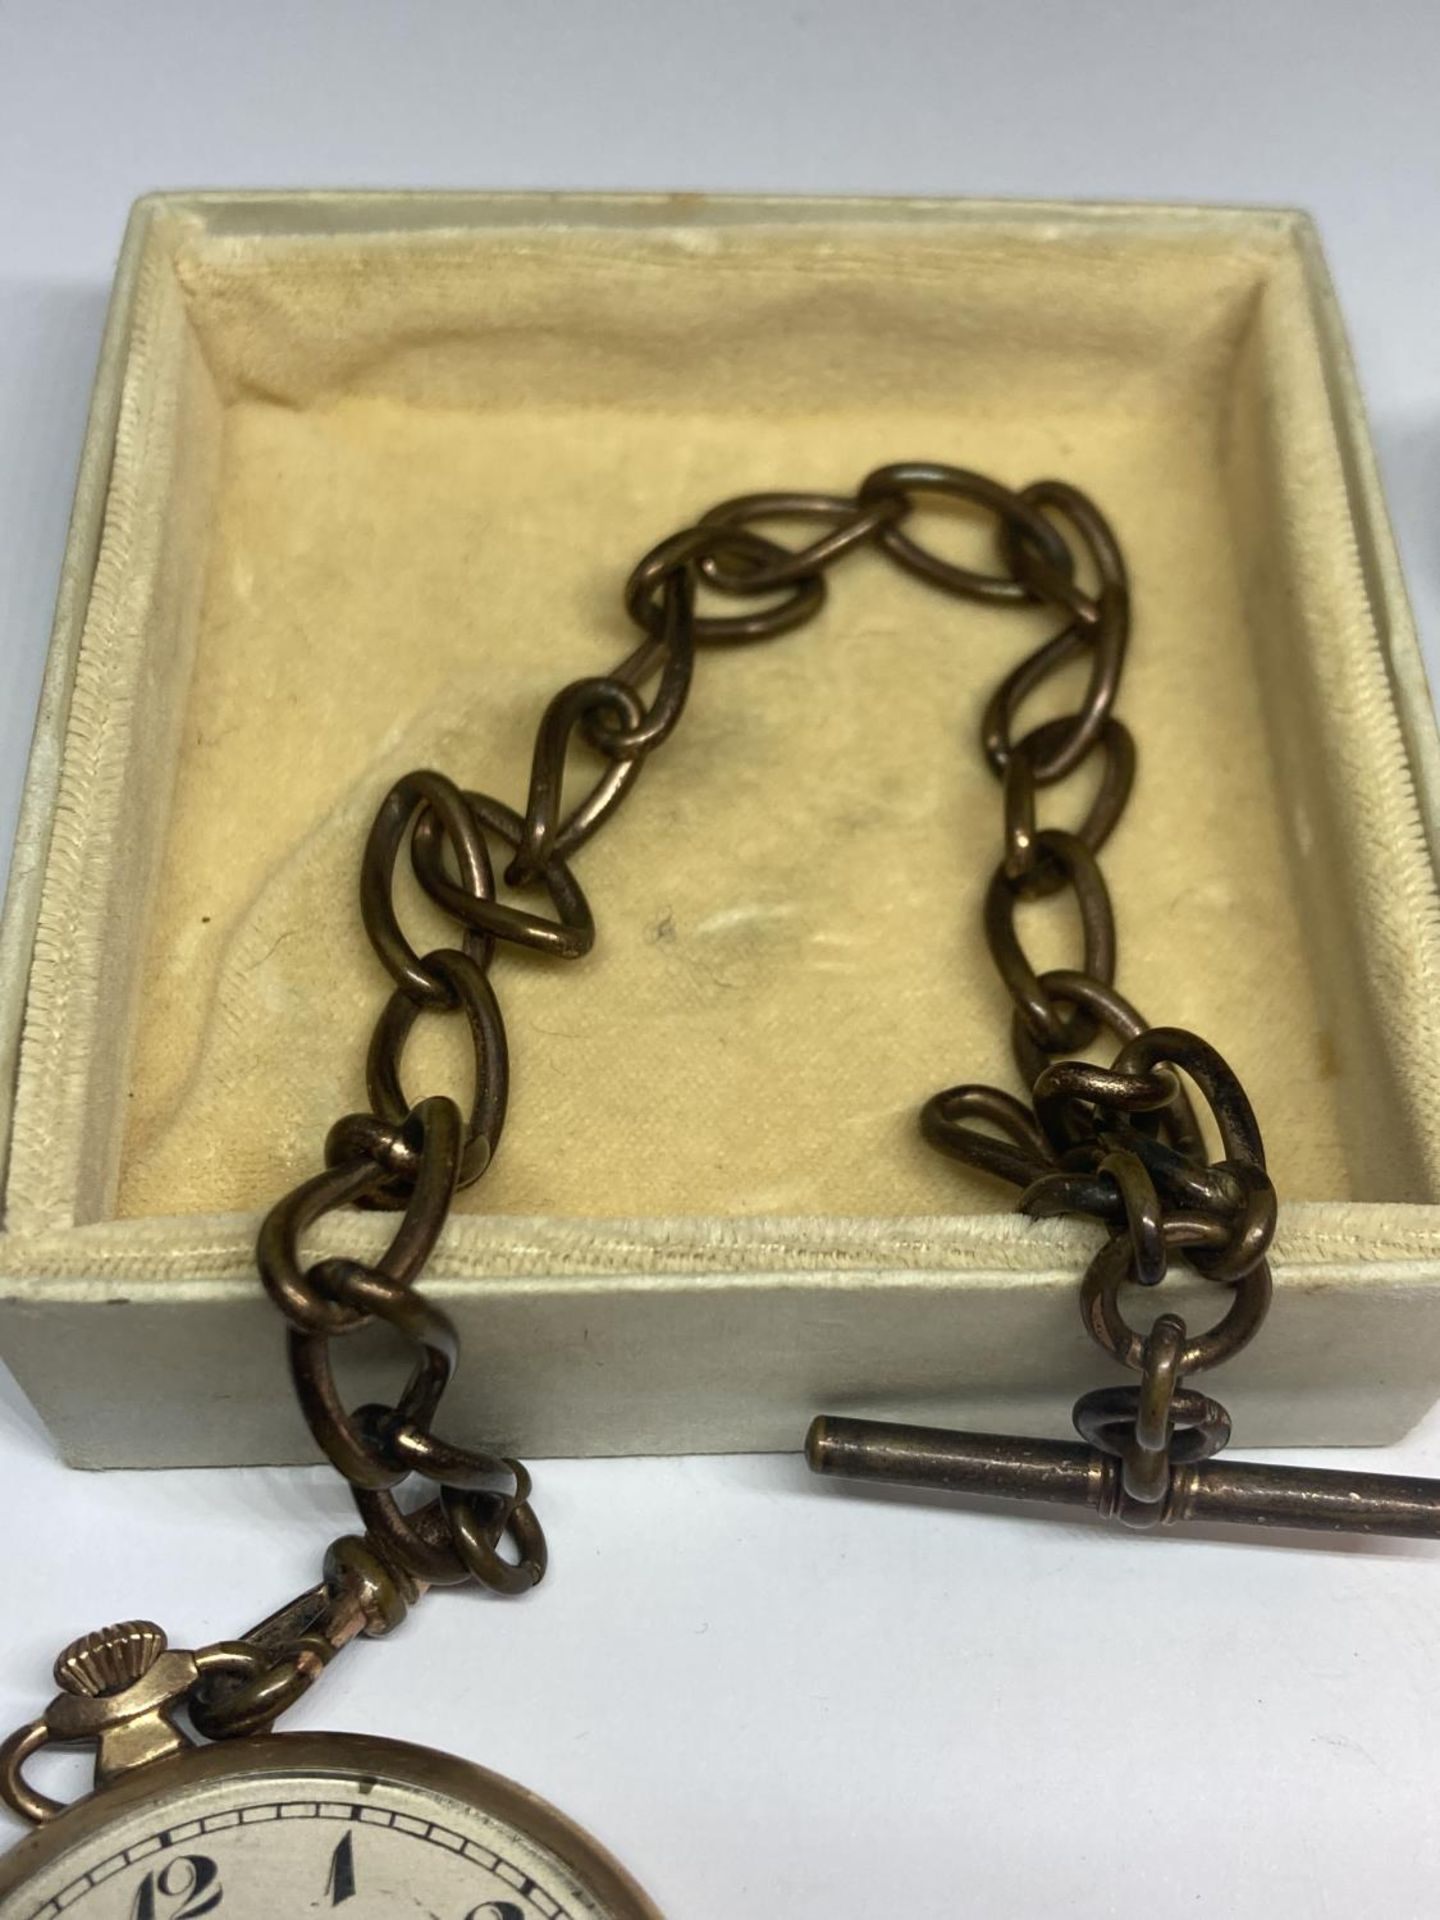 VARIOUS ITEMS TO INCLUDE A GOLD PLATED POCKET WATCH WITH CHAIN, A WHITE METAL POSSIBLY SILVER BROOCH - Image 5 of 6